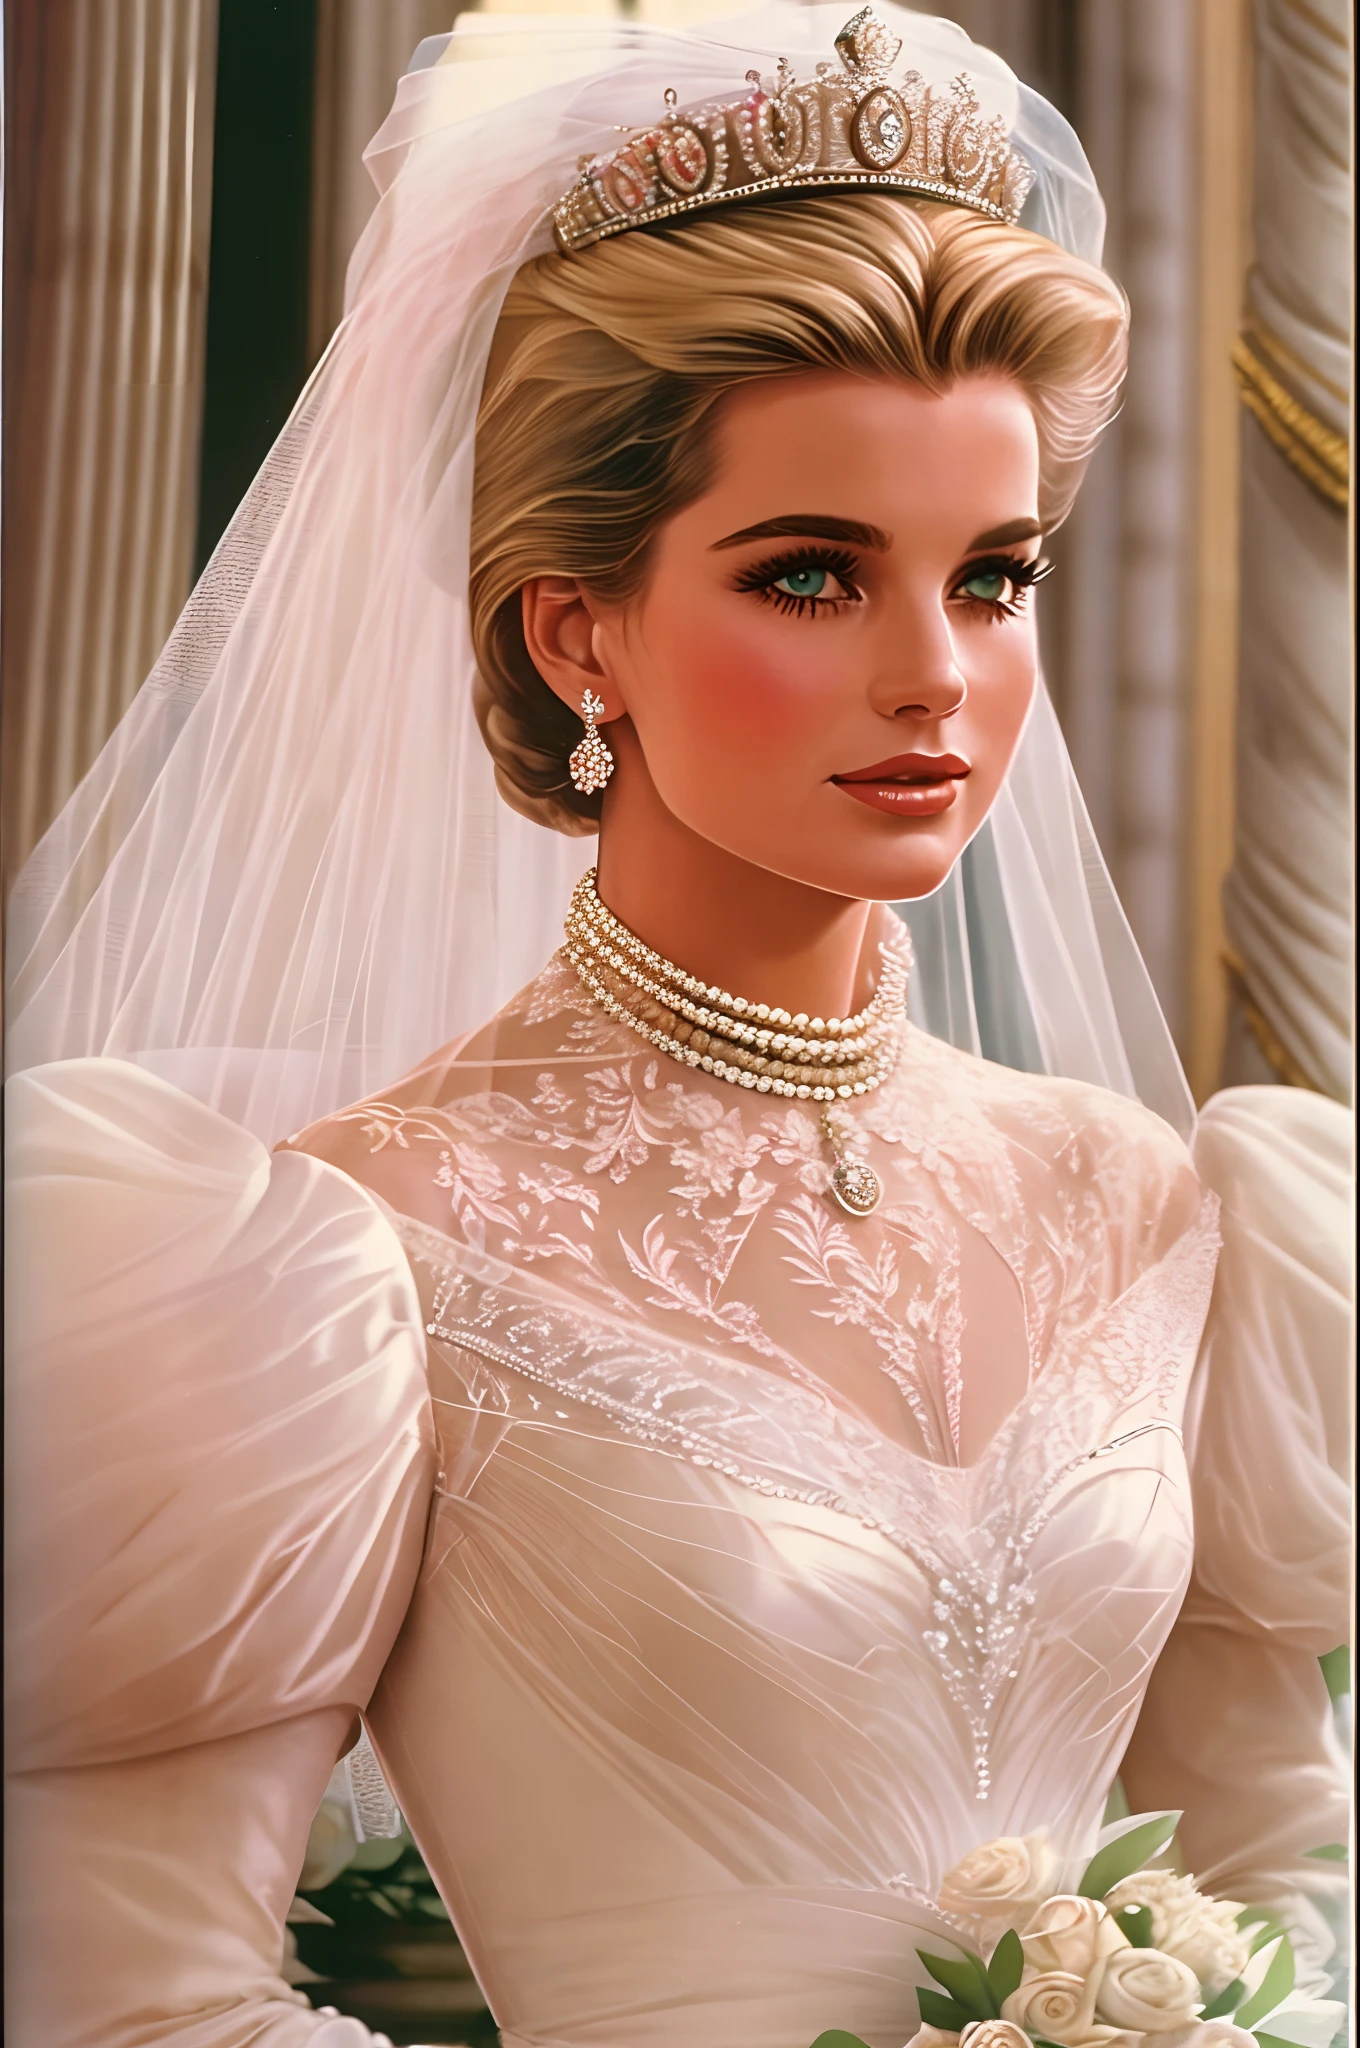 стиль 1980-х годов, Grace Kelly's royal wedding dress updated for the late 1980's with a Cinderella aesthetic and influence from Princess Diana's and Sarah Ferguson's wedding dresses